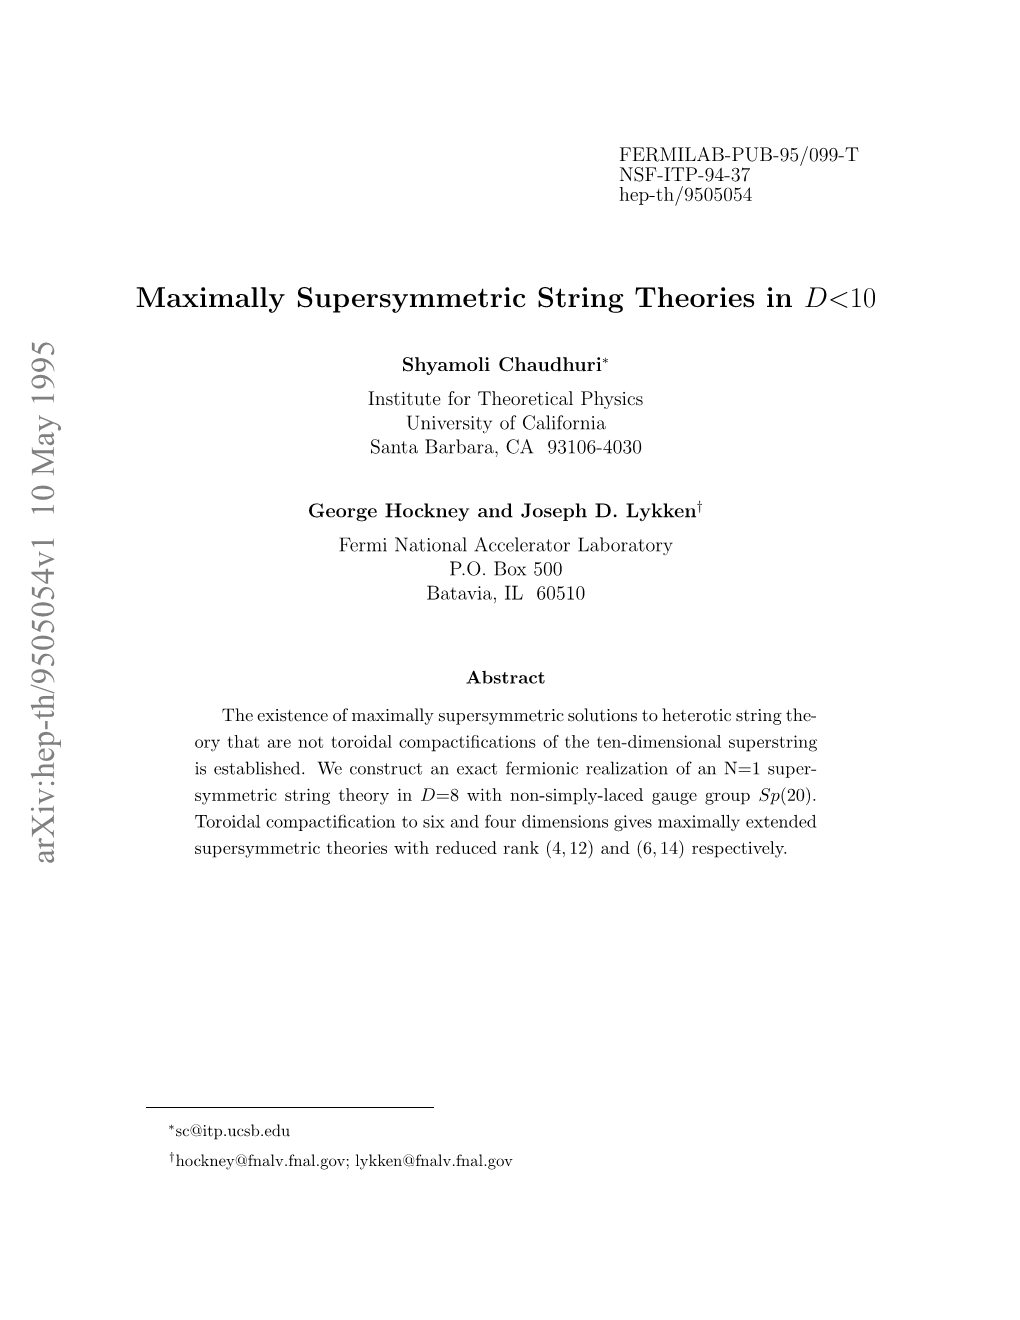 Maximally Supersymmetric String Theories in D&lt; 10